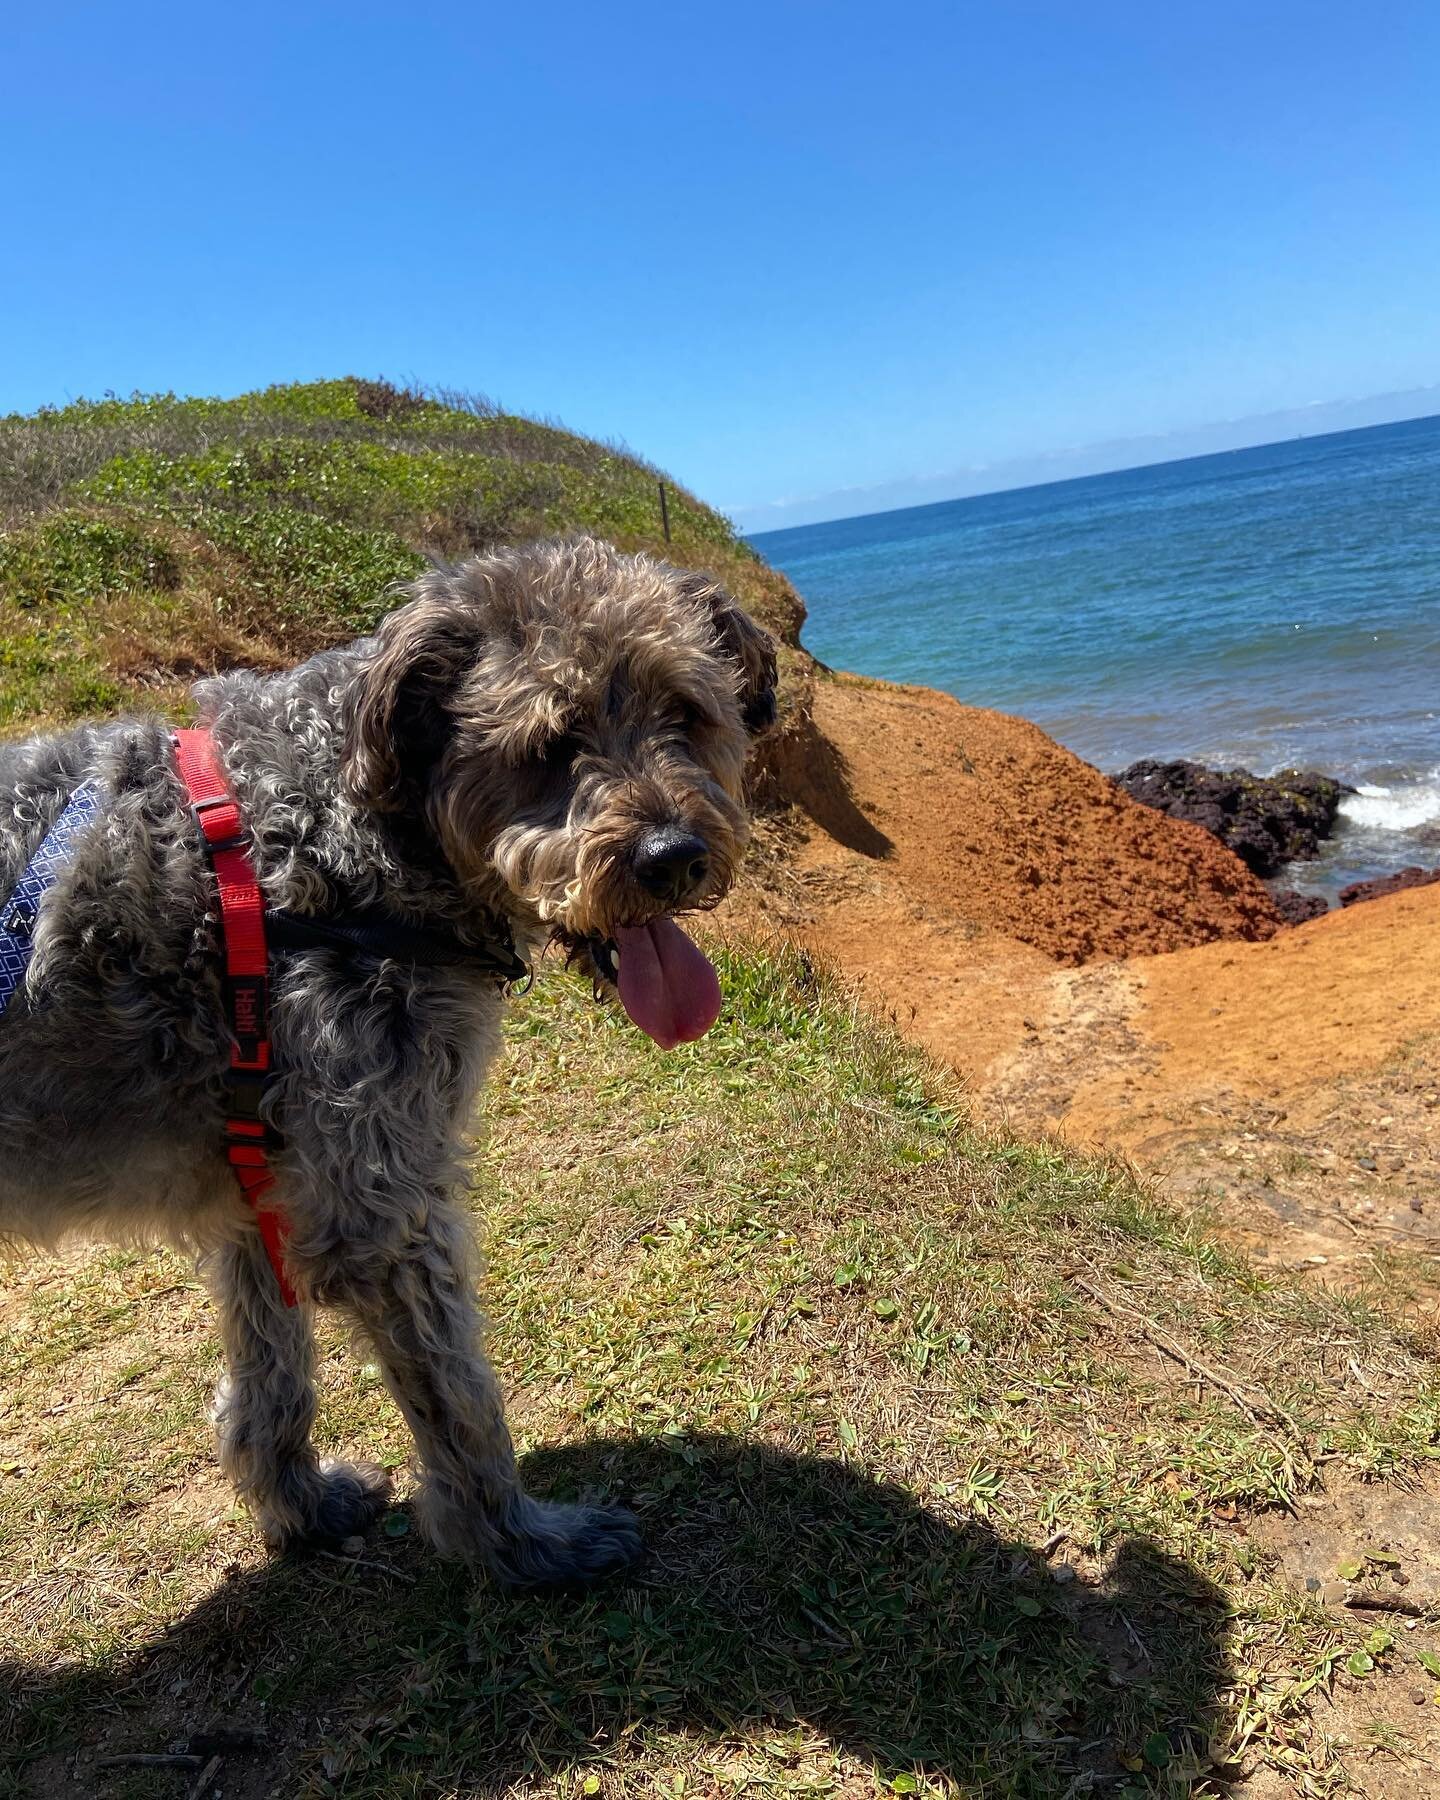 Angus is a dog who loves a good view and a mid-walk belly rub. This fluffy guy is an adventurer at heart with a soft spot for snuggles. We never deny a belly rub, doggy kiss, or cuddle. 

Join us on our next walk with Angus. DM us here, or message Sa